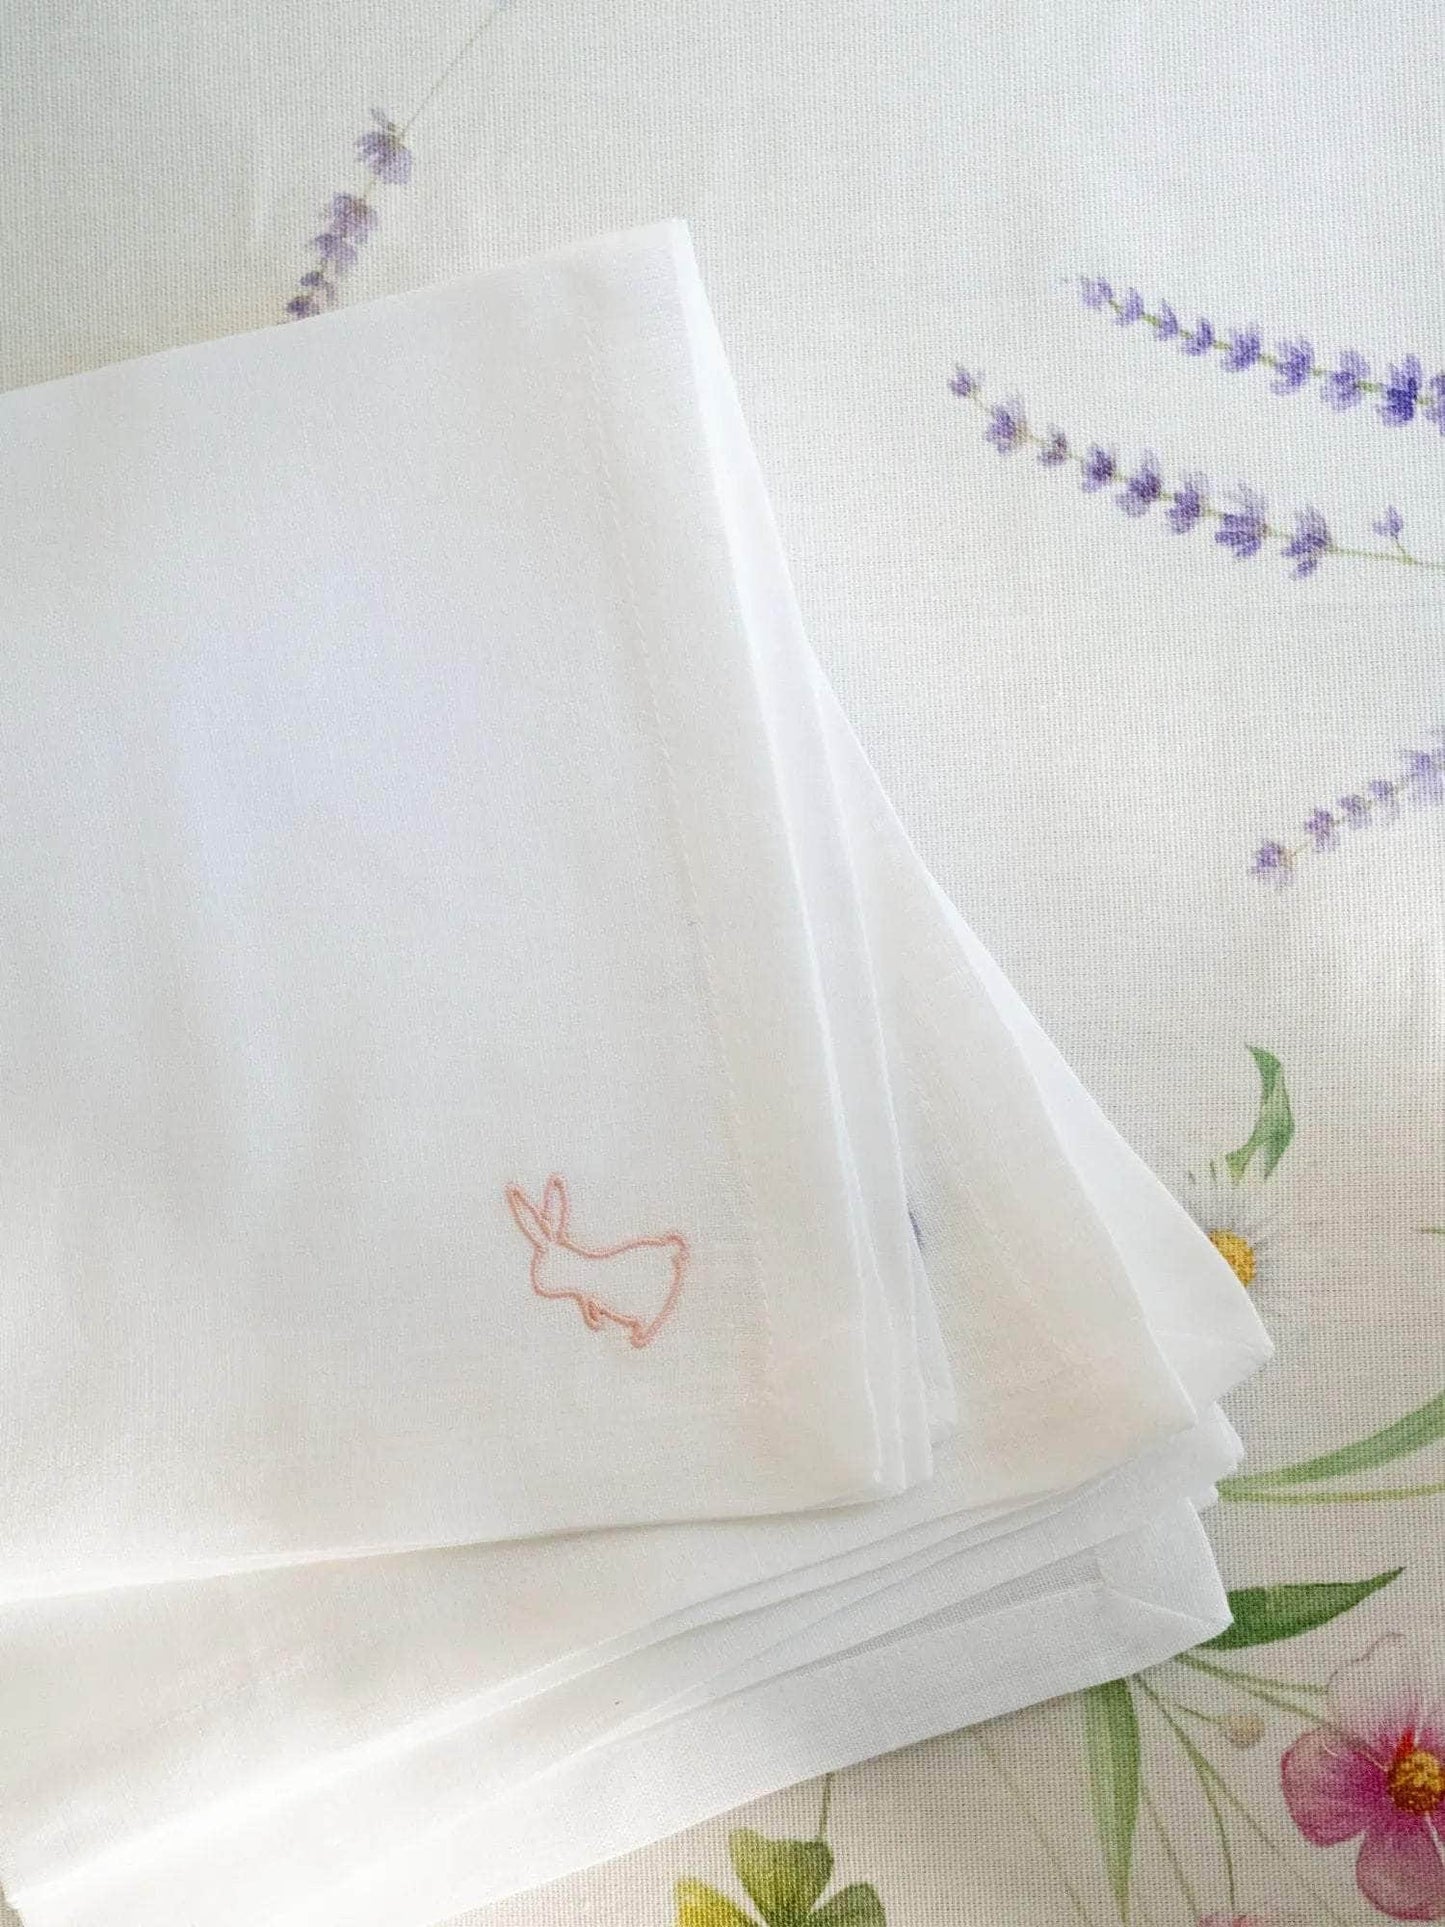 Embroidered Bunny Napkins, Set of Four